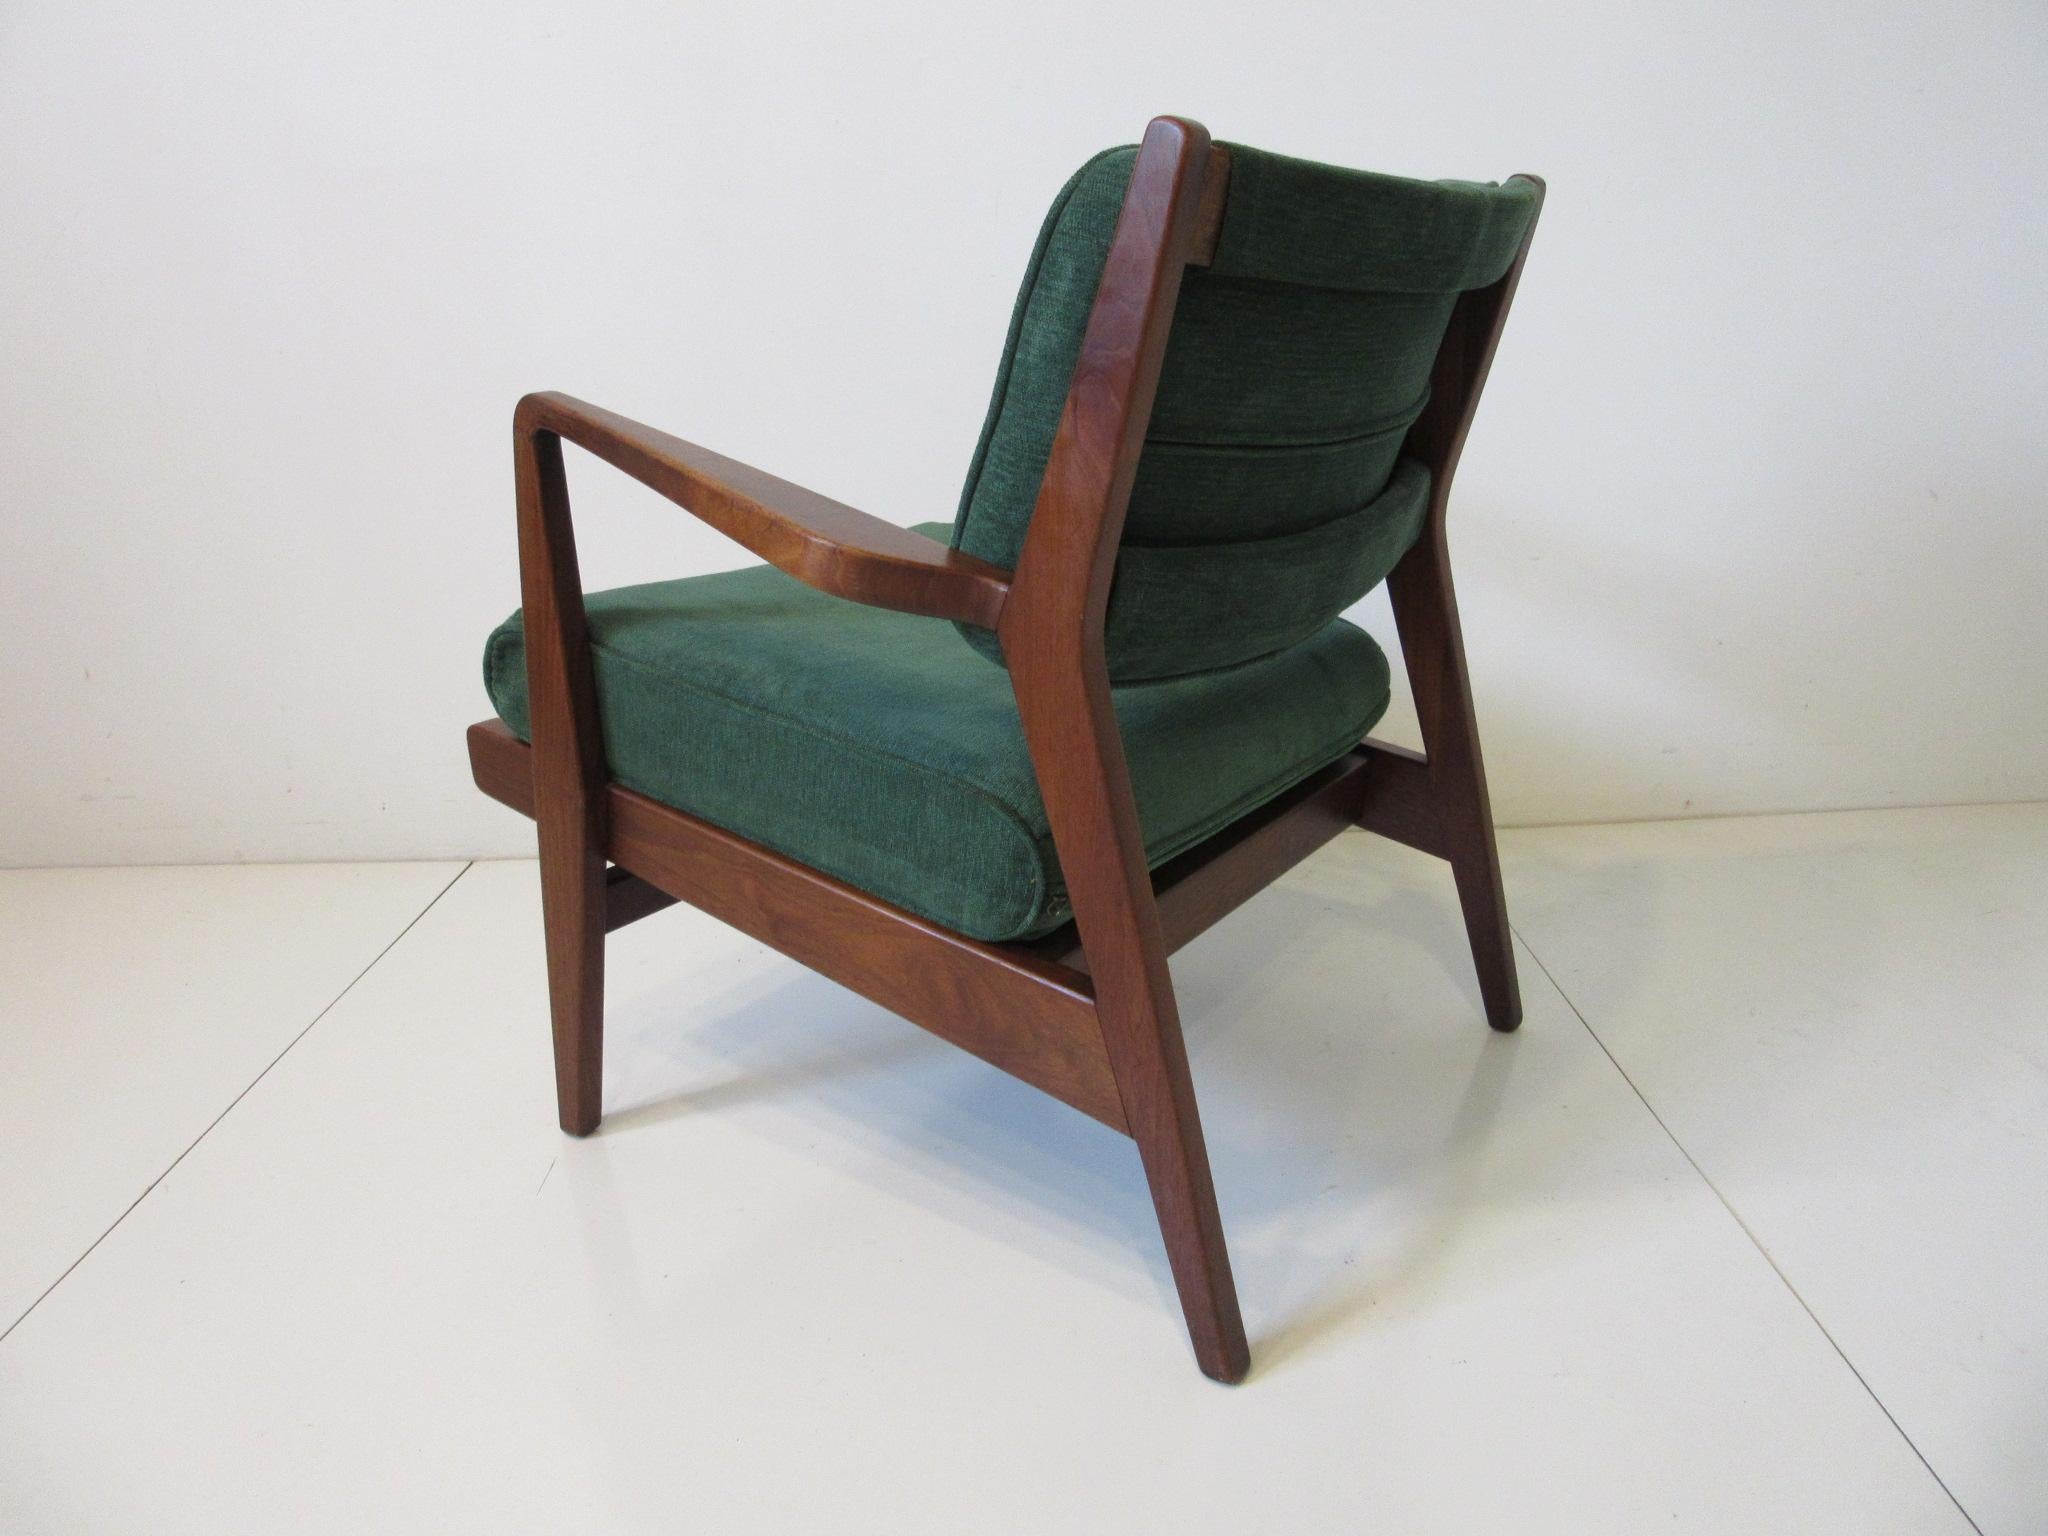 An early walnut framed low lounge chair with upholstered back and bottom cushion in a soft comfortable forest green material. Having flared armrests and nice splayed styled legs giving the piece that very well designed and constructed look typical